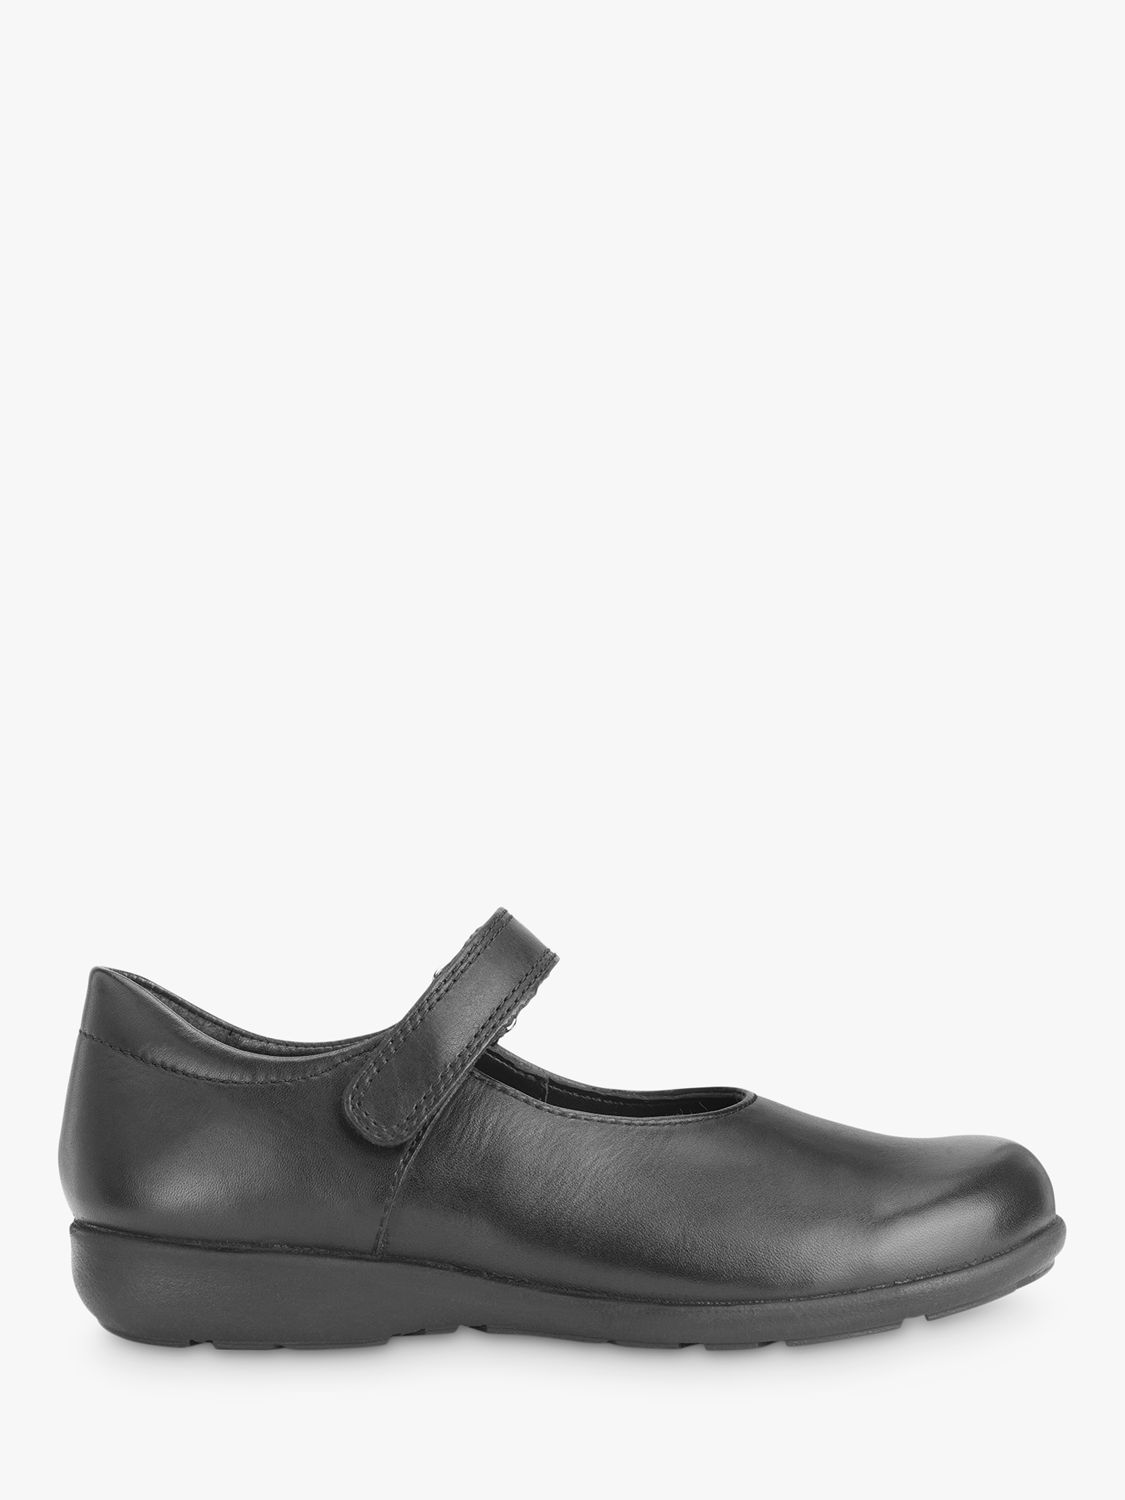 Buy Simply by Start-Rite Kids' Classroom Leather School Shoes, Black Online at johnlewis.com